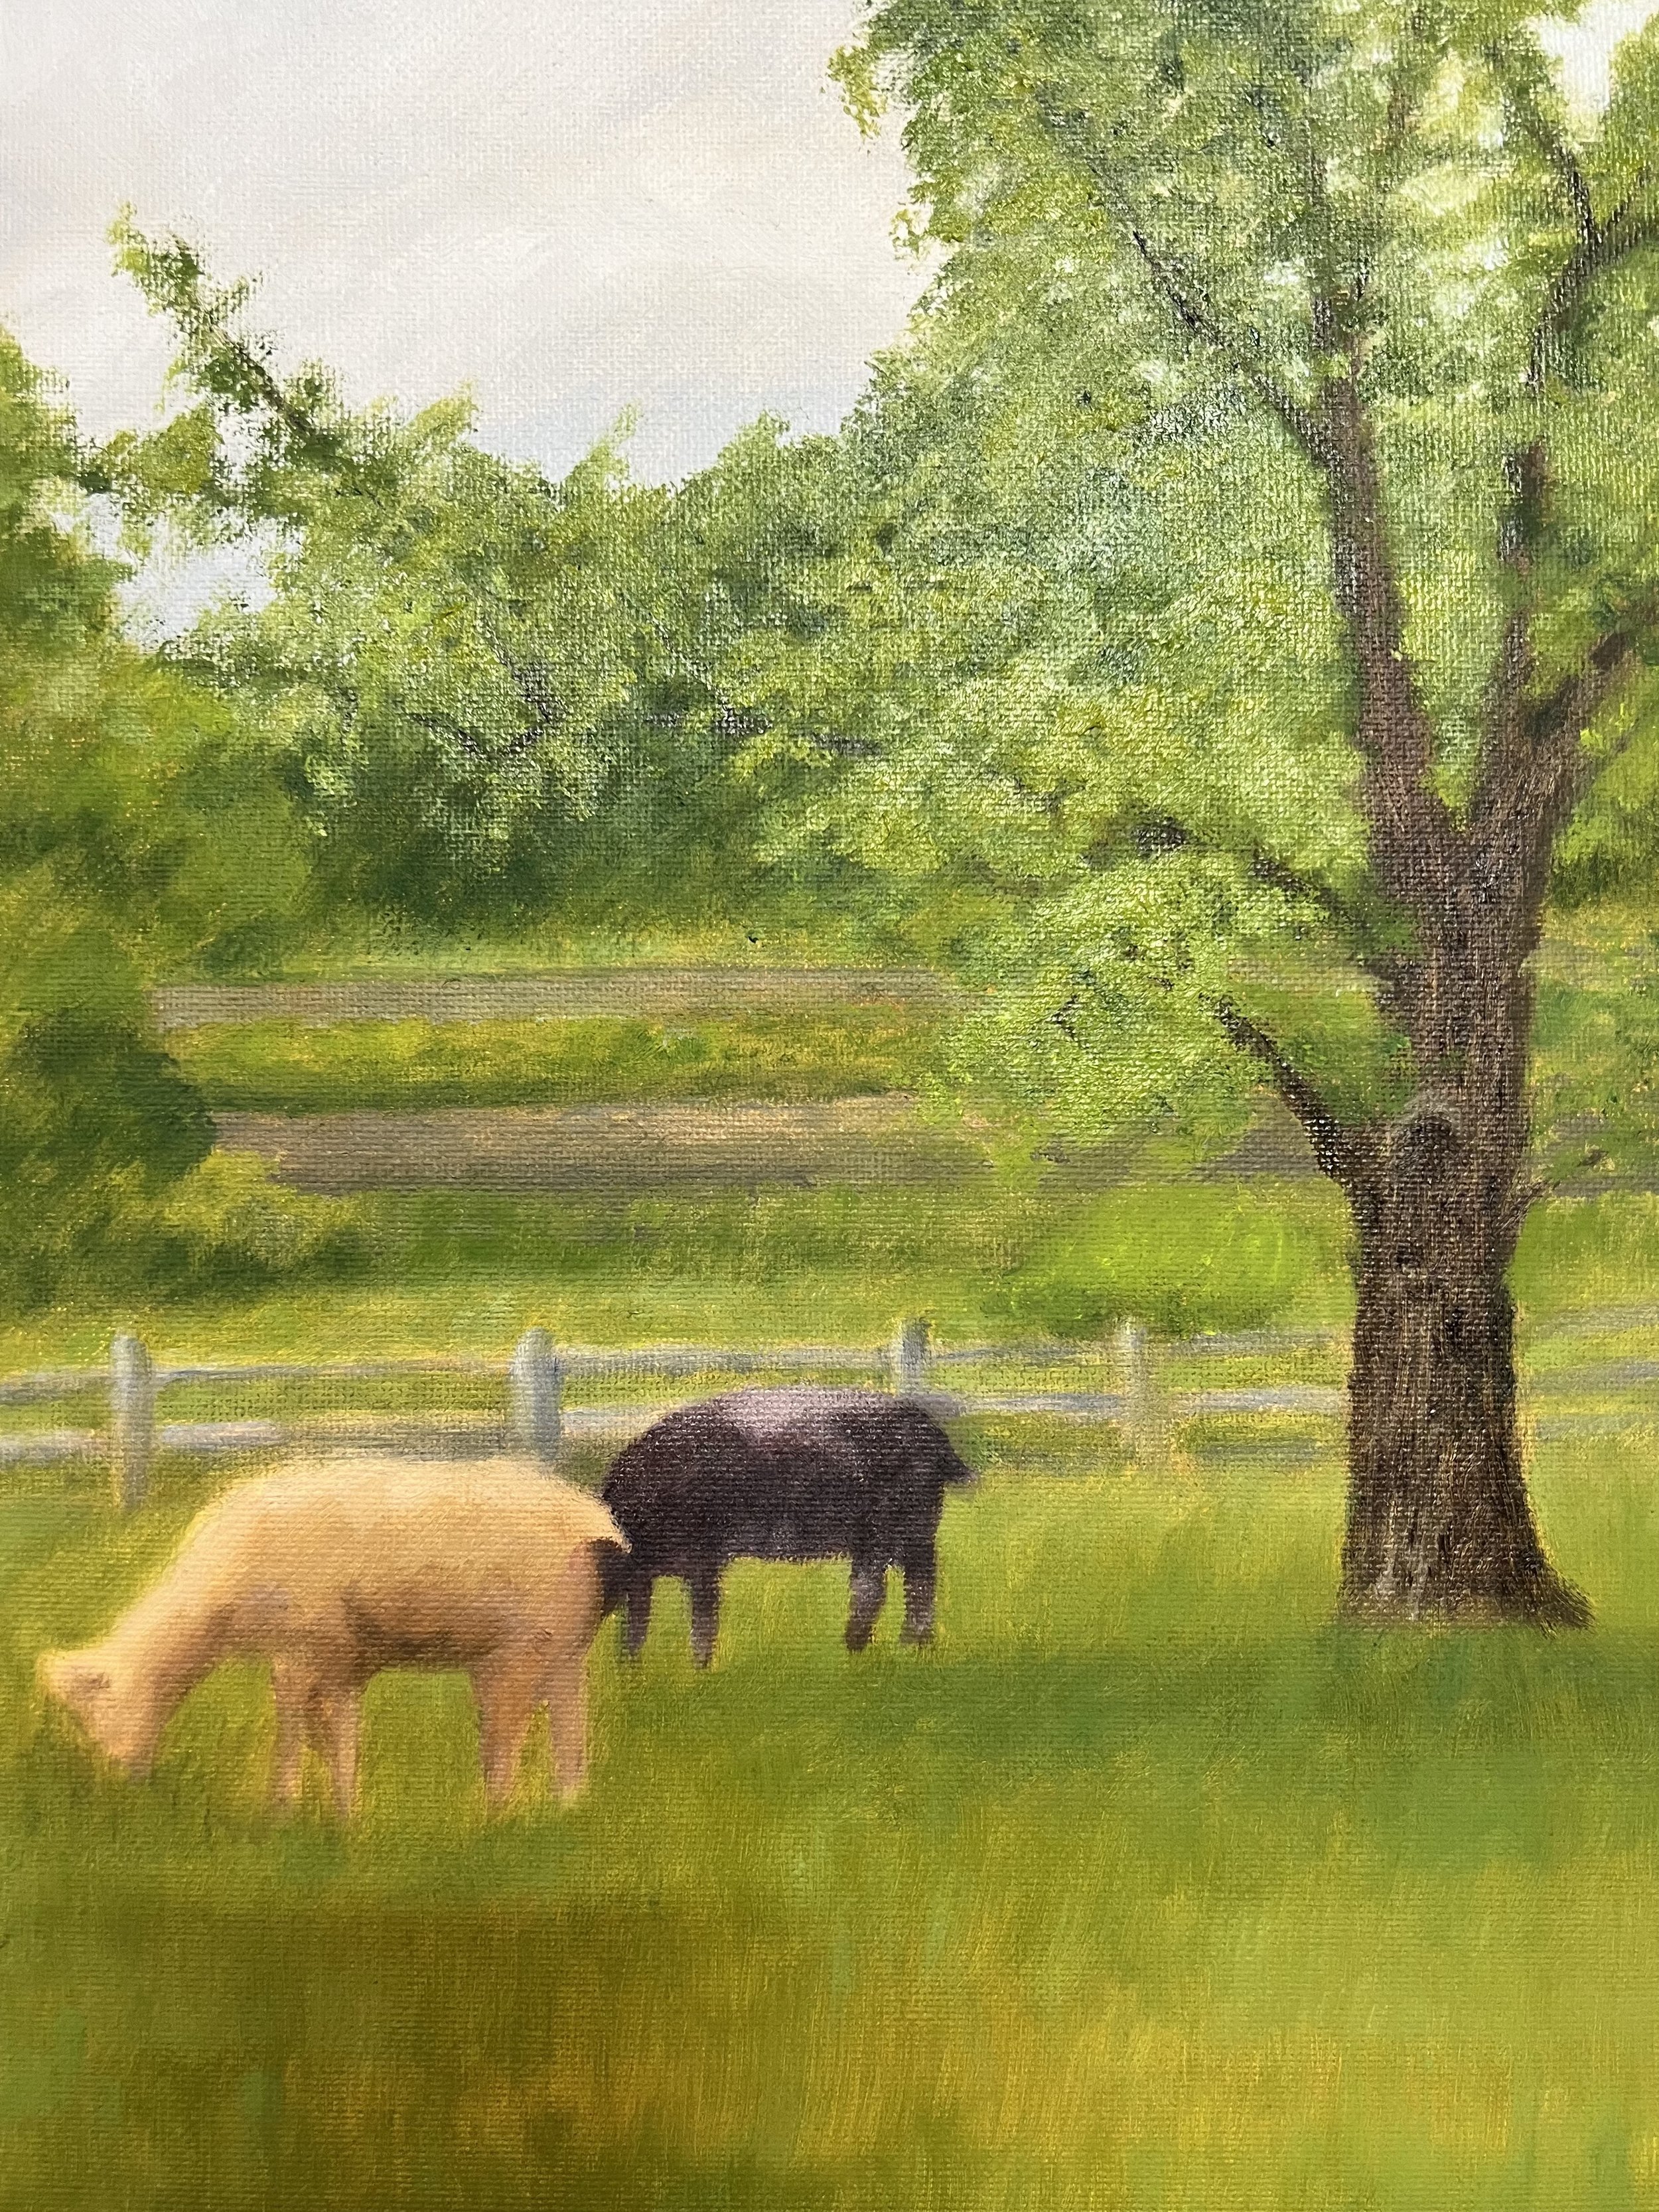 Quiet Afternoon on the Farm (sold)